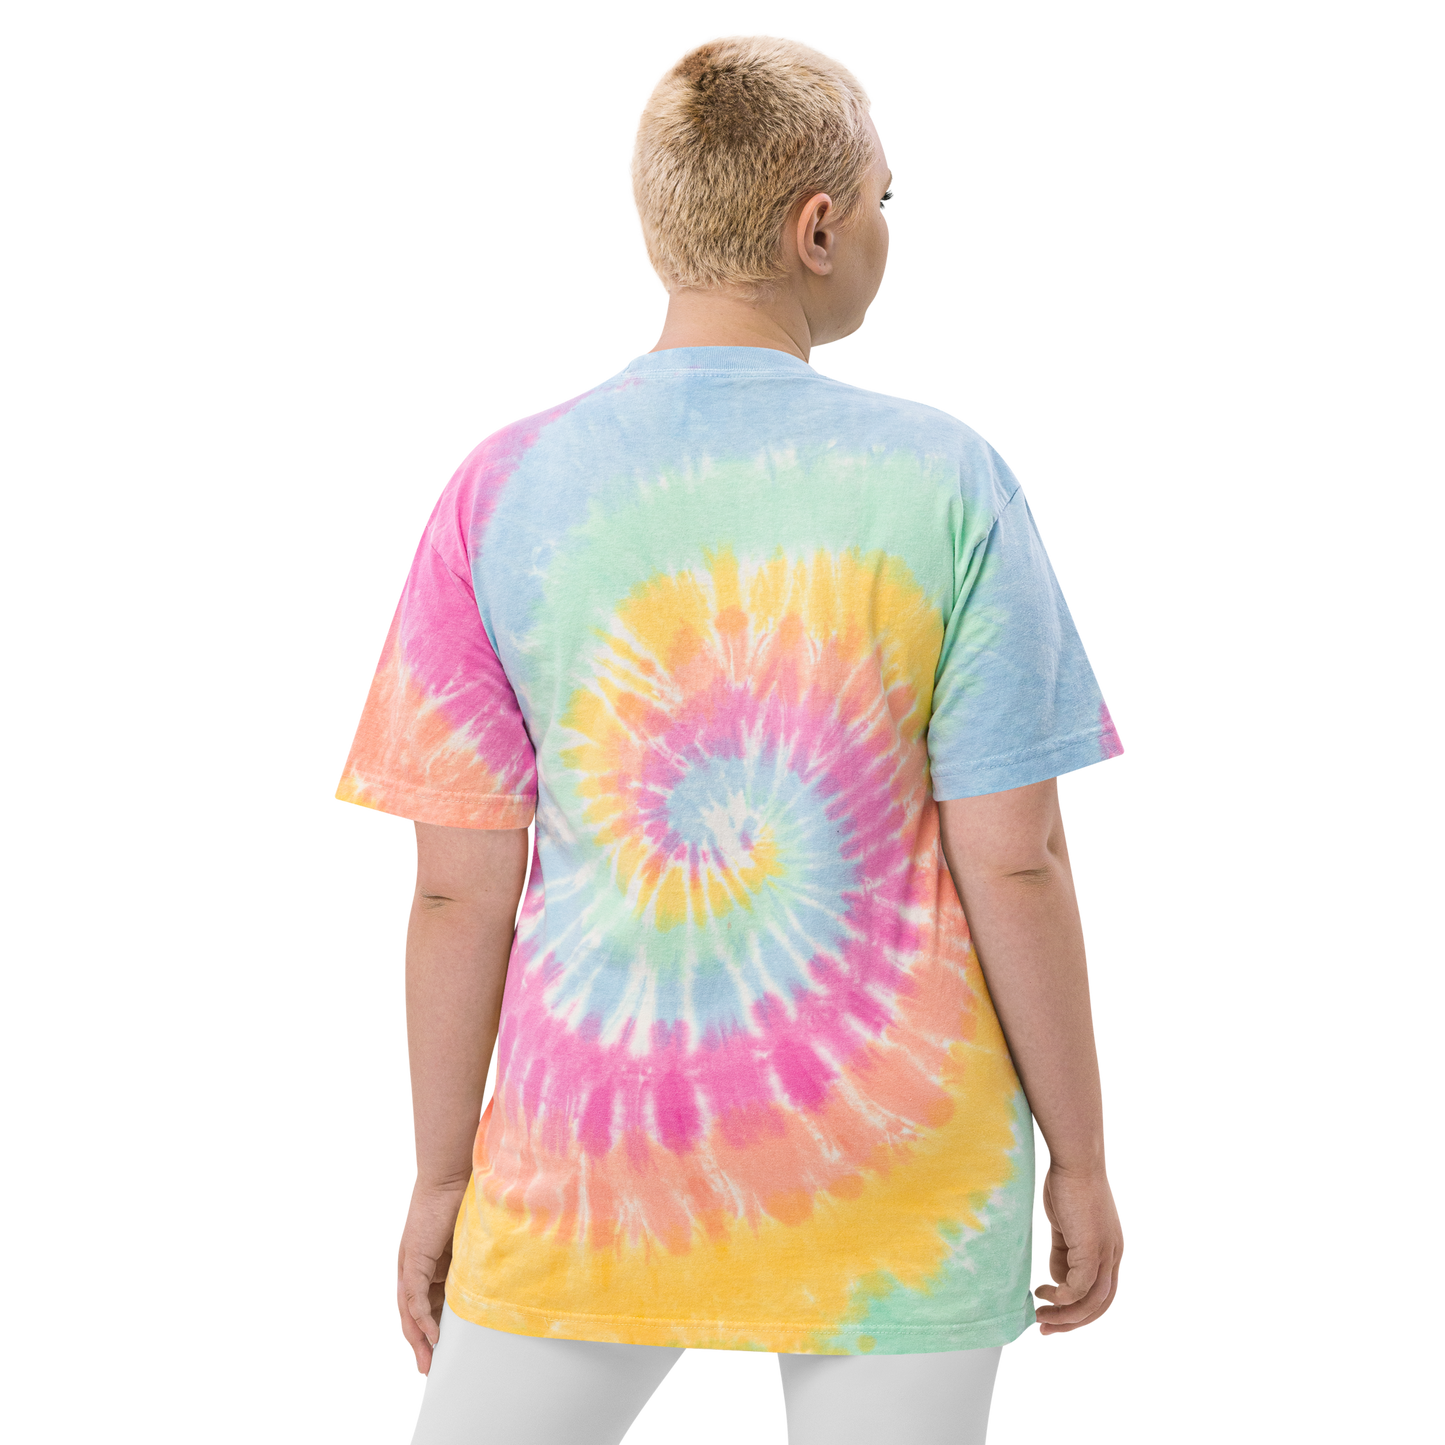 Crossed-X Oversized Tie-Dye T-Shirt • YQB Quebec City • YHM Designs - Image 12